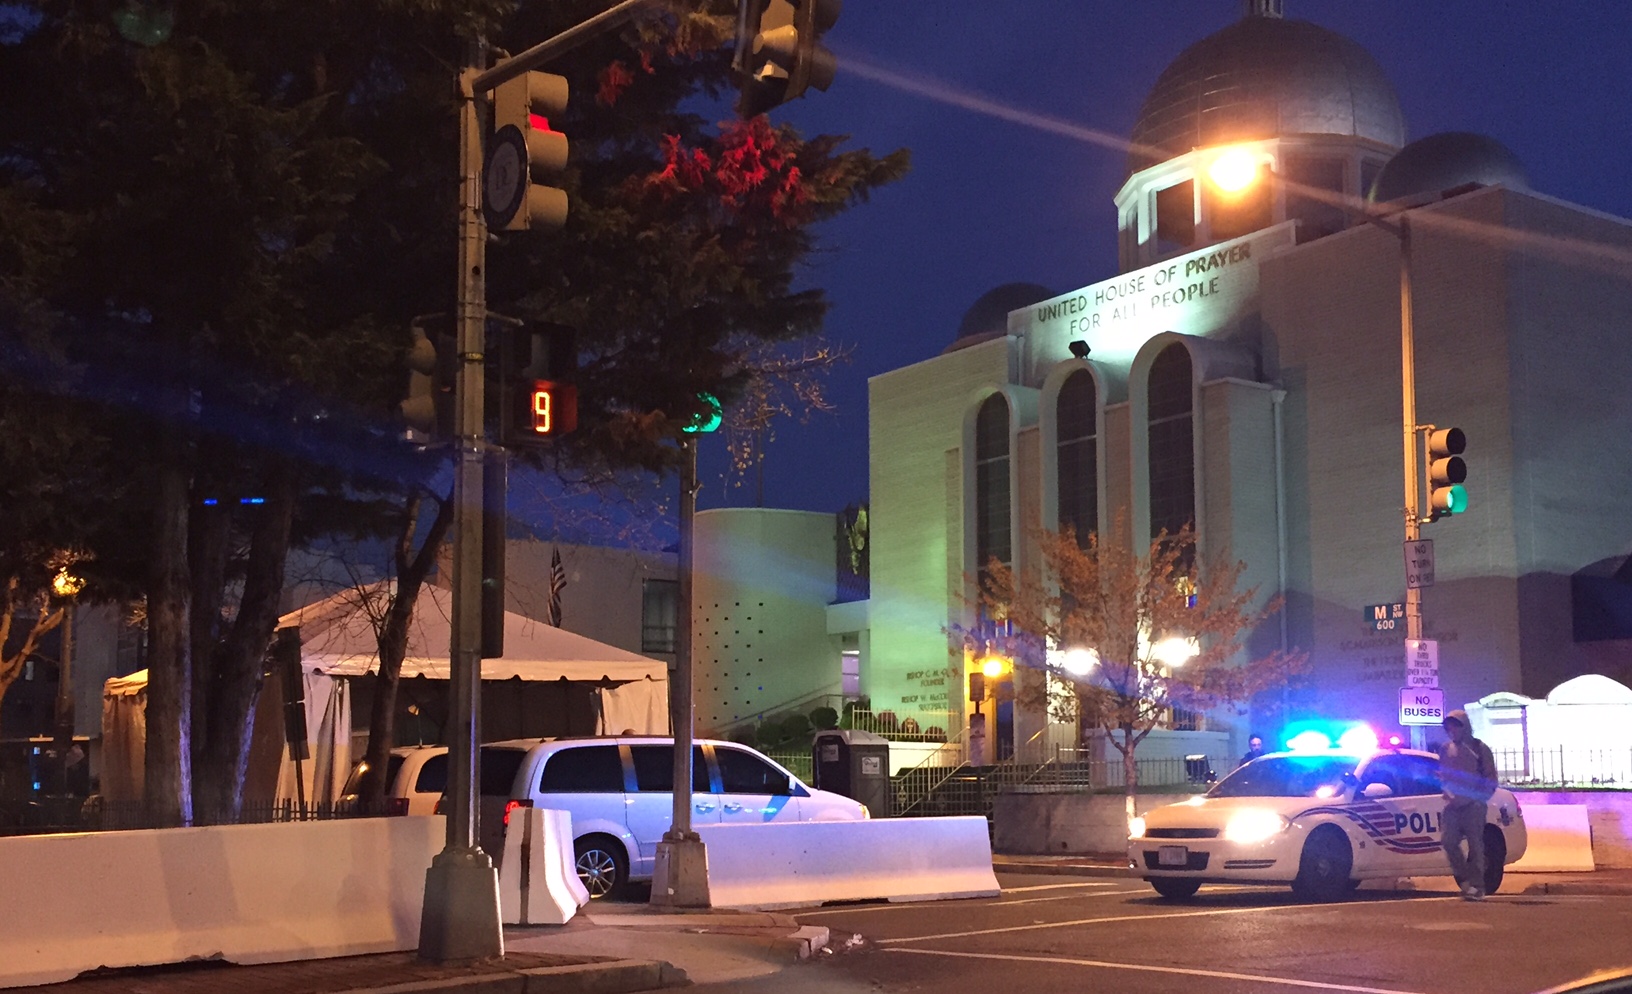 Crews work to close roads across D.C. in the early morning hours before the Nuclear Security Summit. Police block the road in front of the United House of Prayer while barriers are put in place. (WTOP/ Dennis Foley)